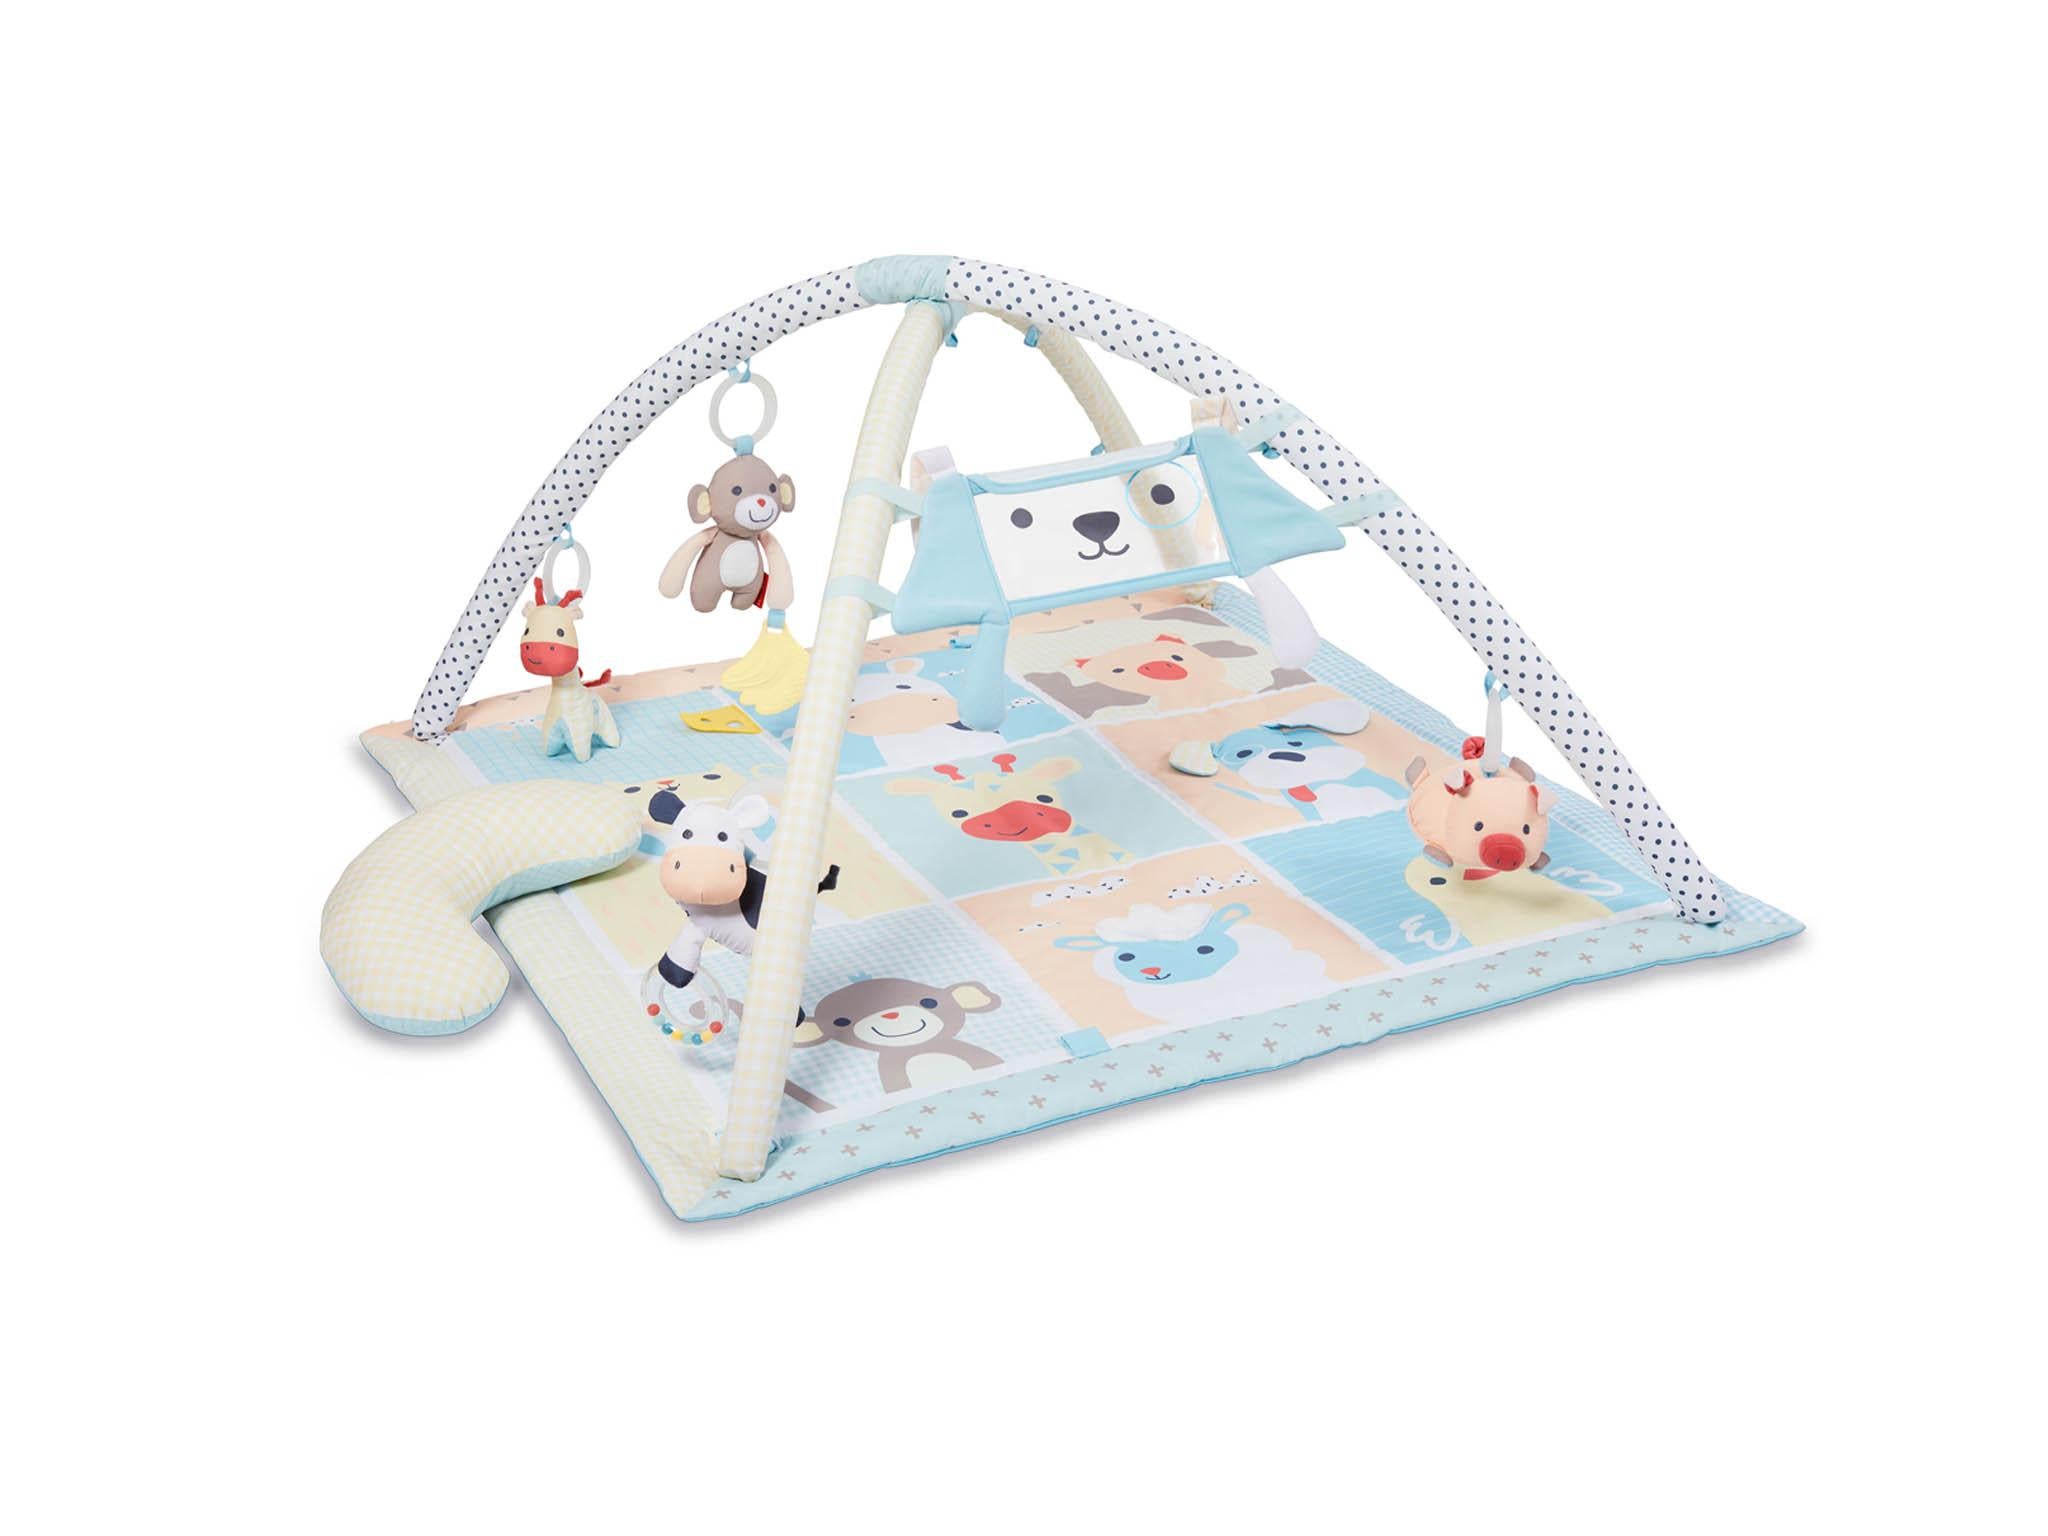 the best play gym for babies